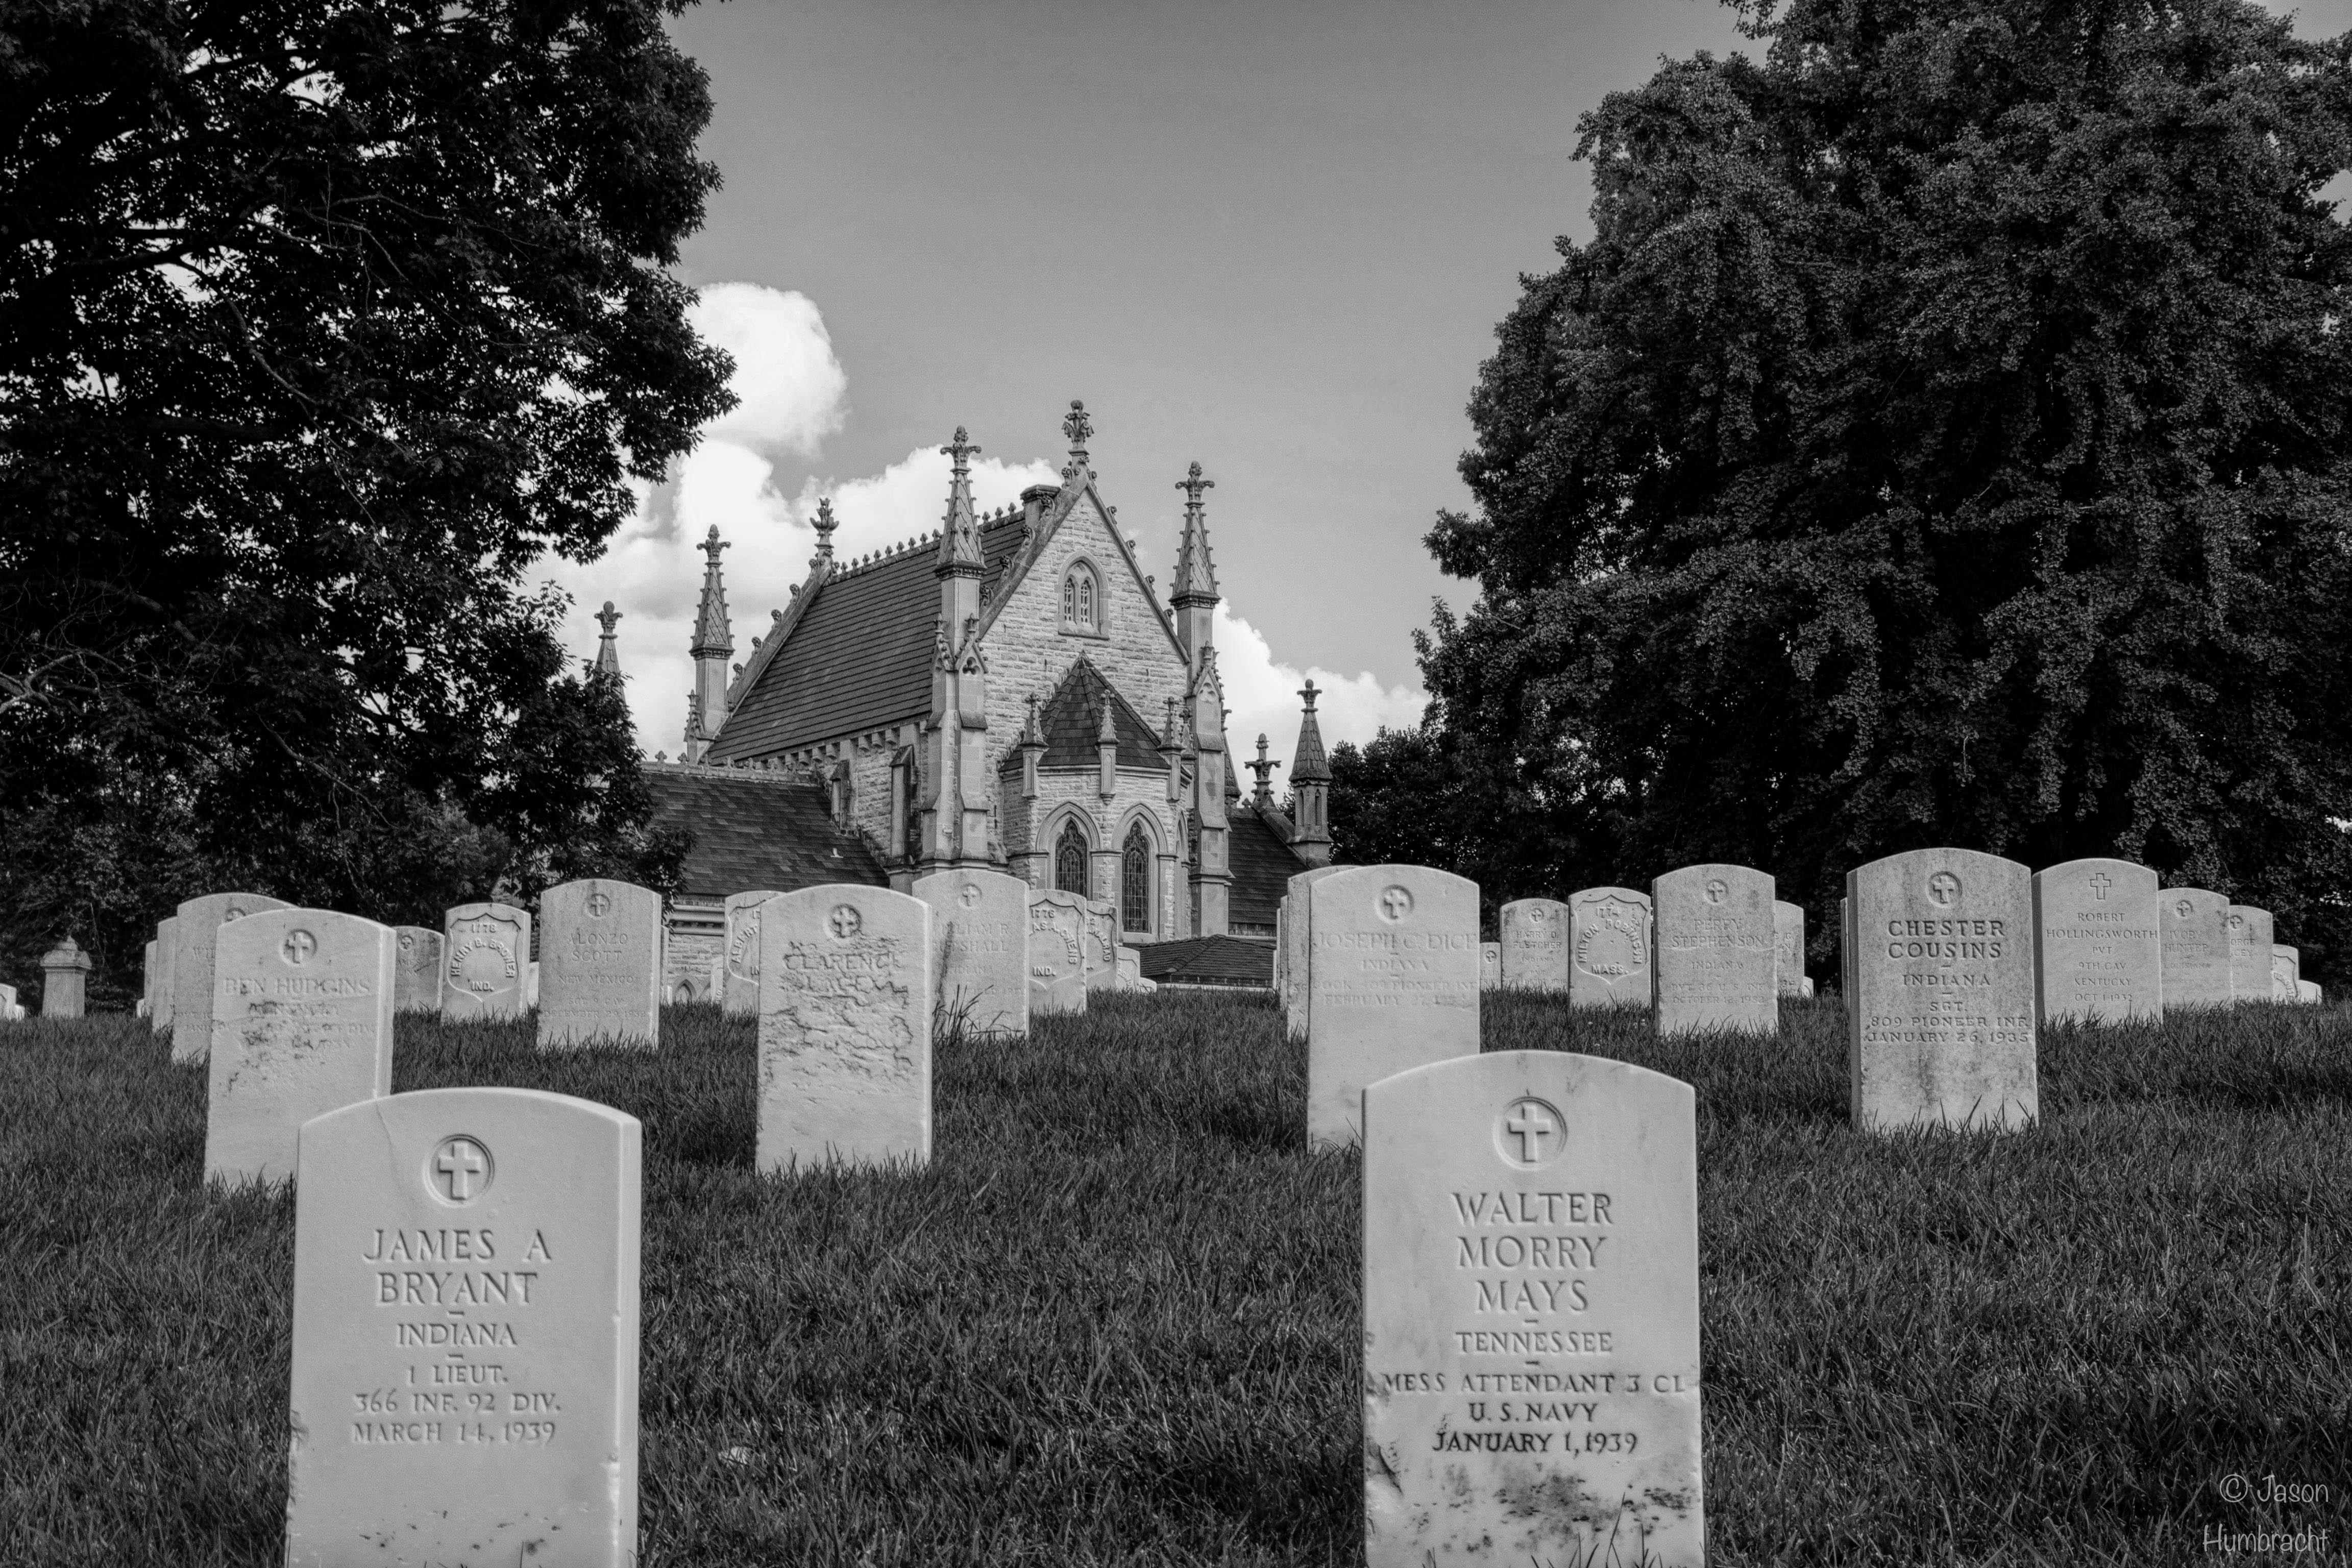 Crown Hill Cemetery | Indianapolis Indiana | Black & White | Image By Indiana Architectural Photographer Jason Humbracht